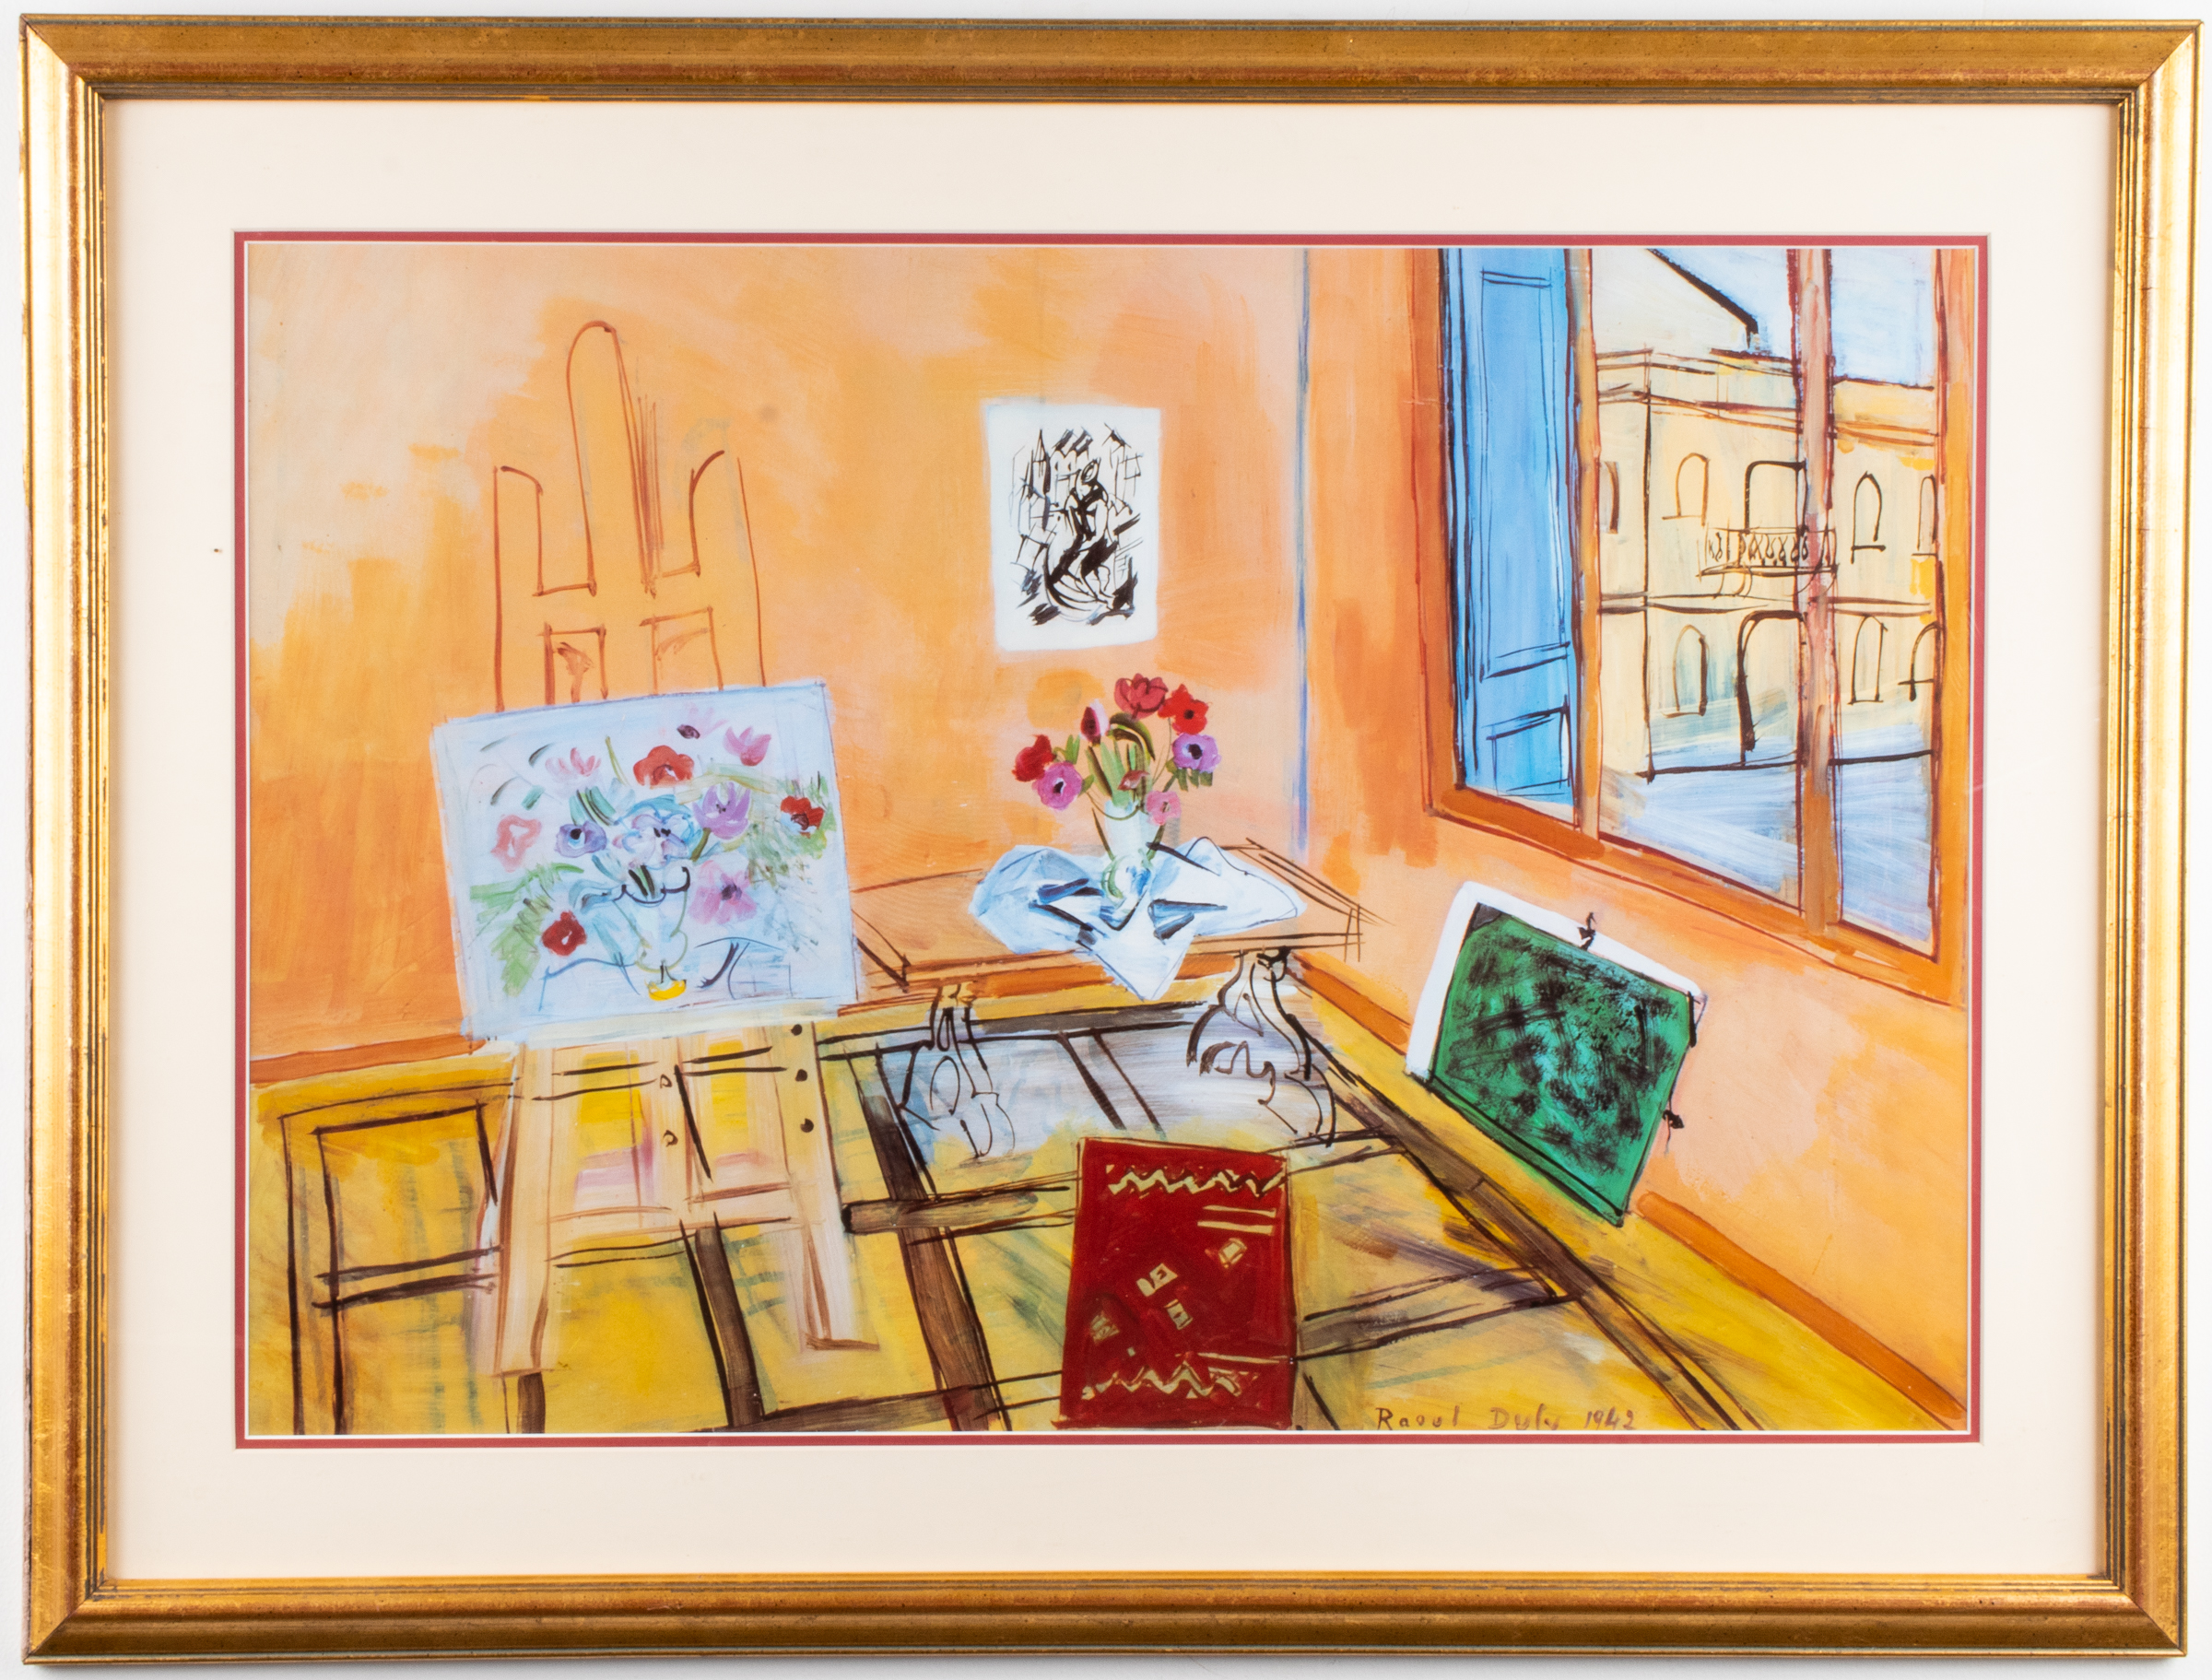 AFTER RAOUL DUFY, "ARTIST'S STUDIO"